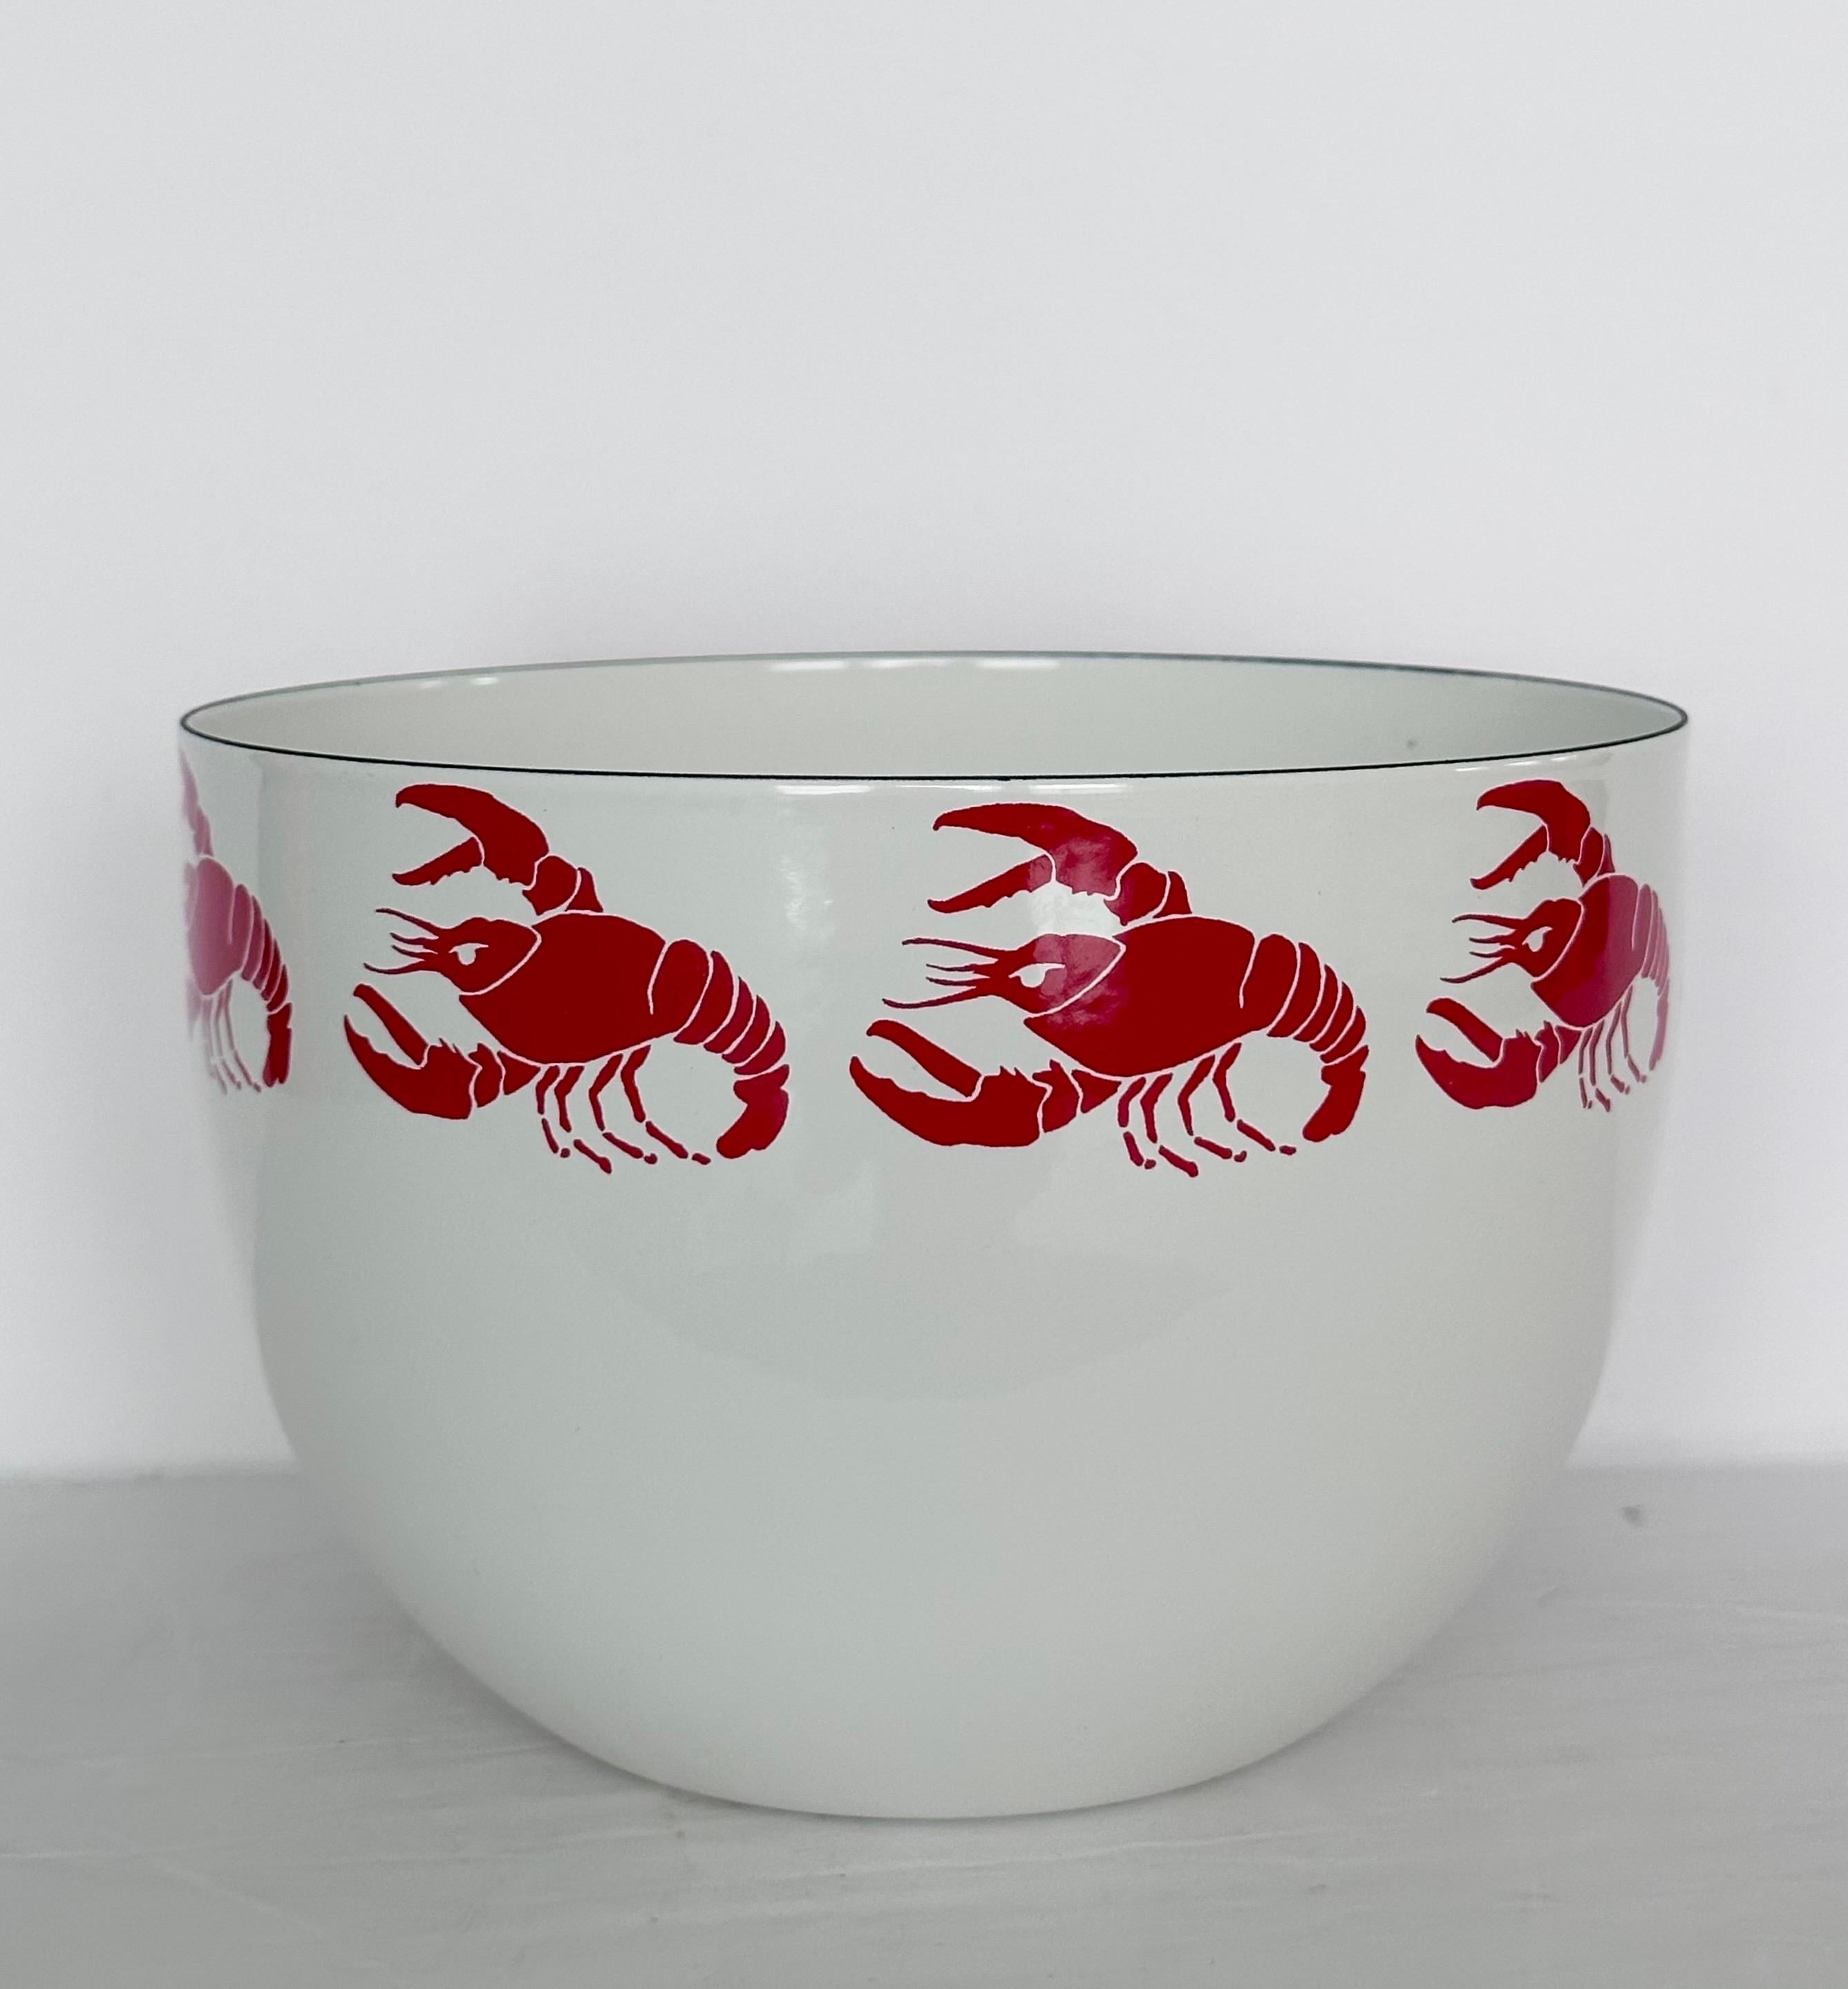 We are very pleased to offer a stunning bowl by Arabia, circa 1960s. One of Arabia's iconic lines is the 